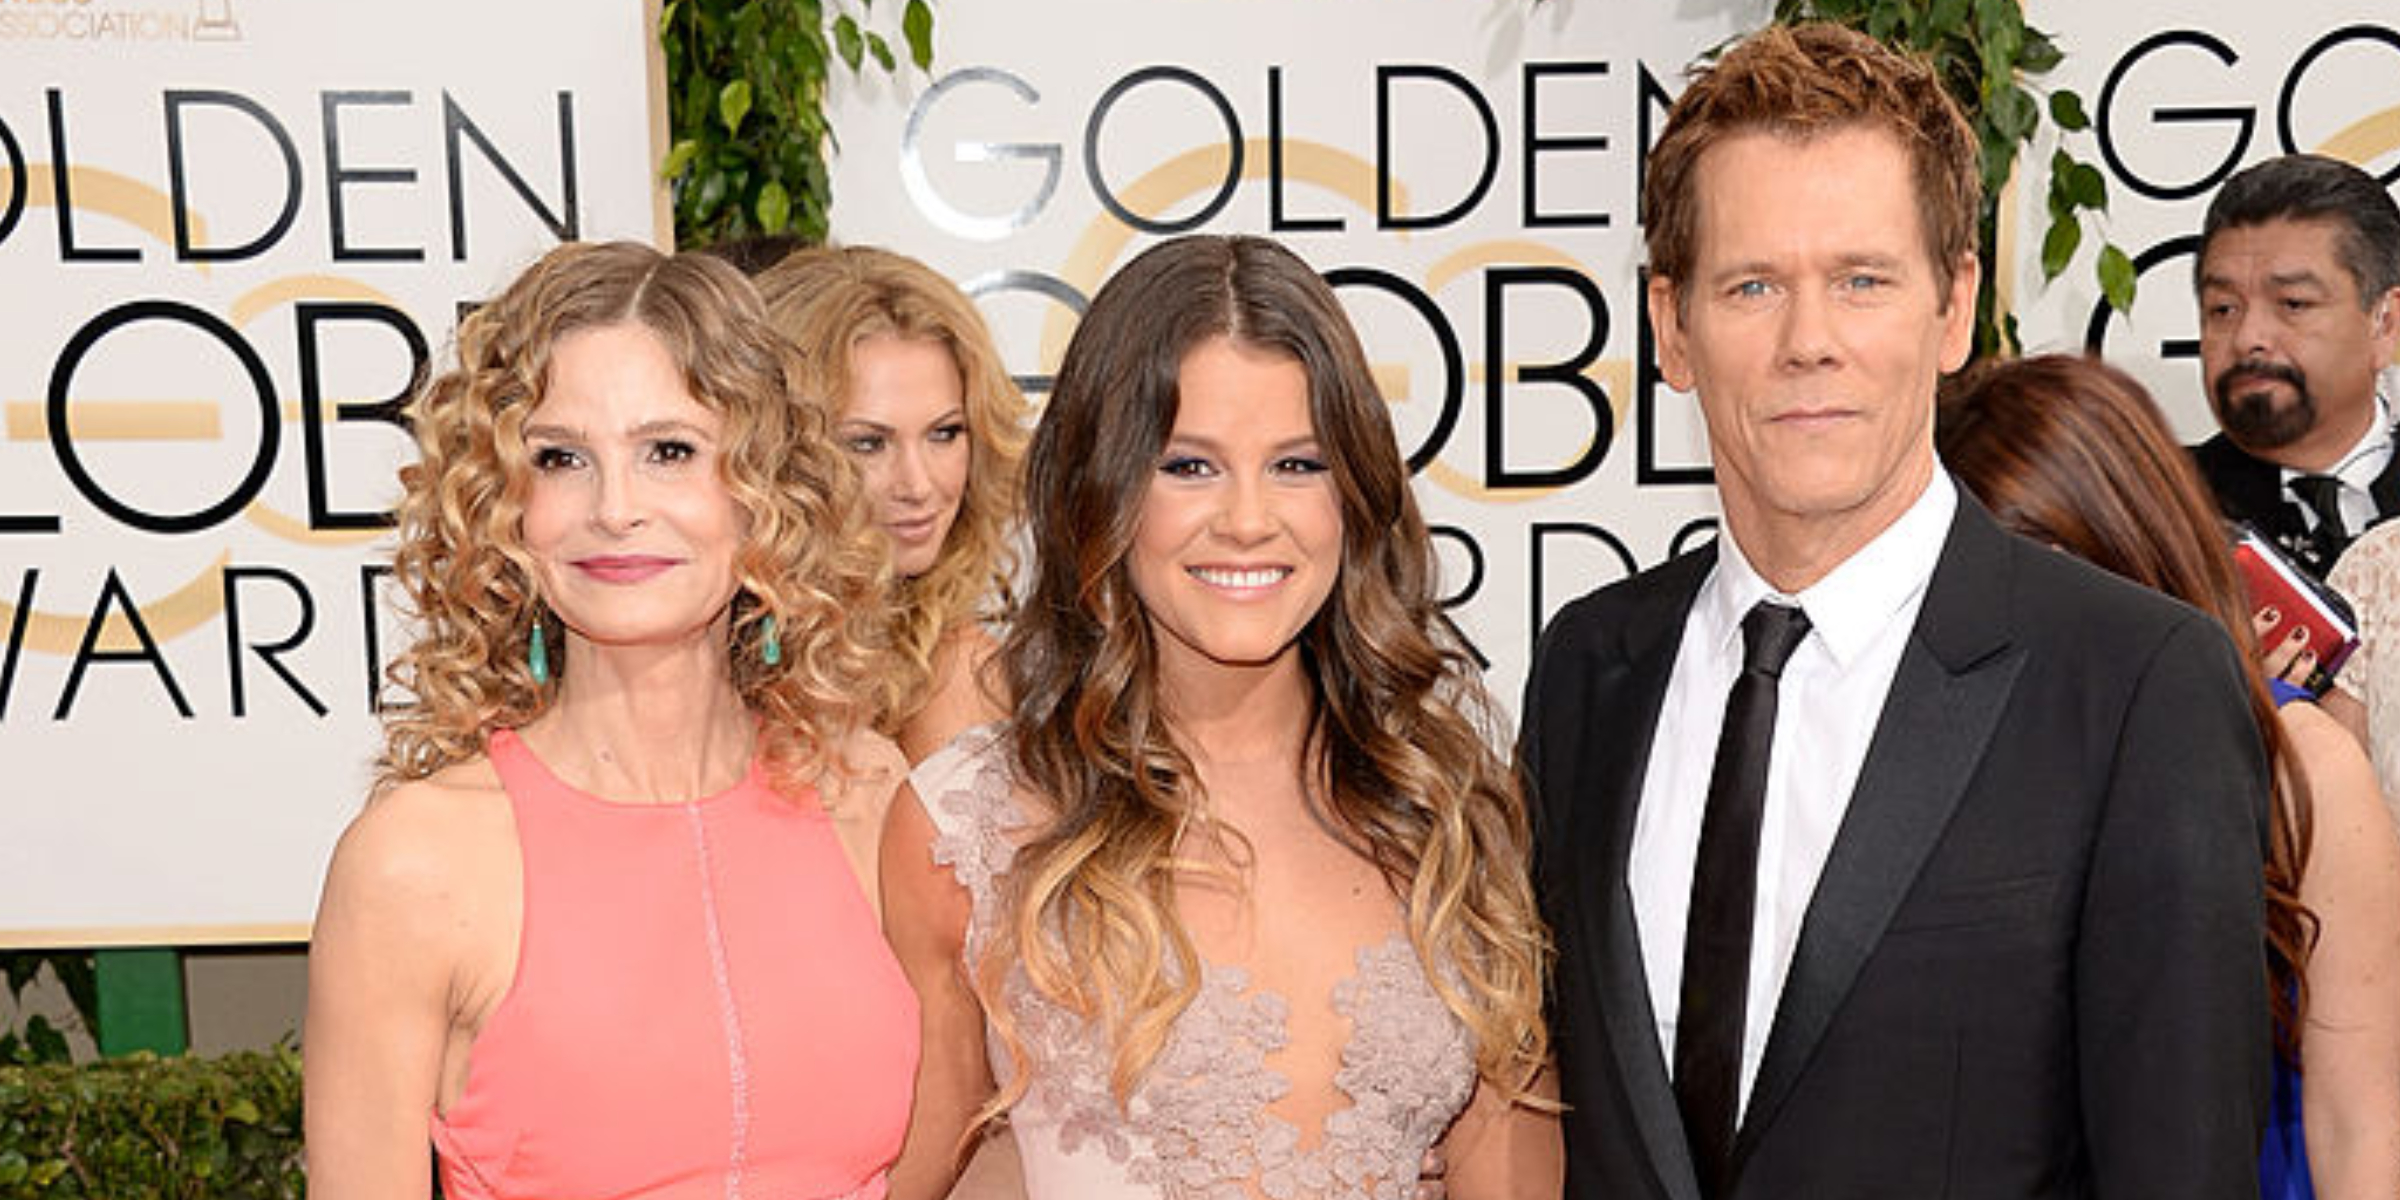 Kyra Sedgwick, Sosie Bacon, and Kevin Bacon | Source: Getty Images